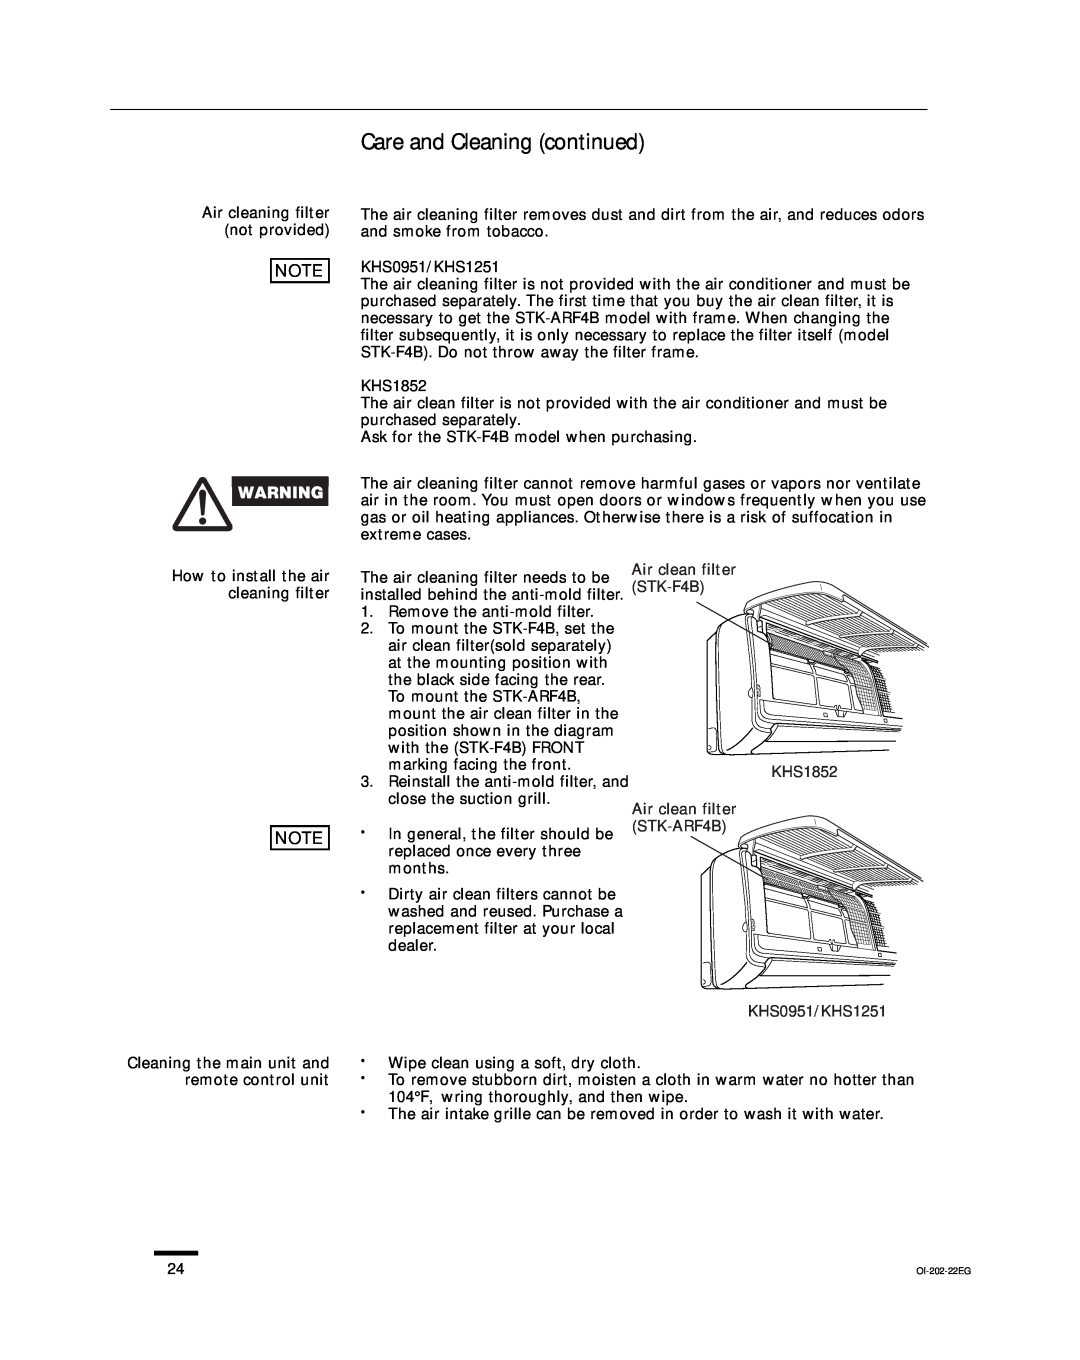 Sanyo KHS1852-S, CH1852, CH0952 service manual Care and Cleaning continued, Air cleaning filter not provided 